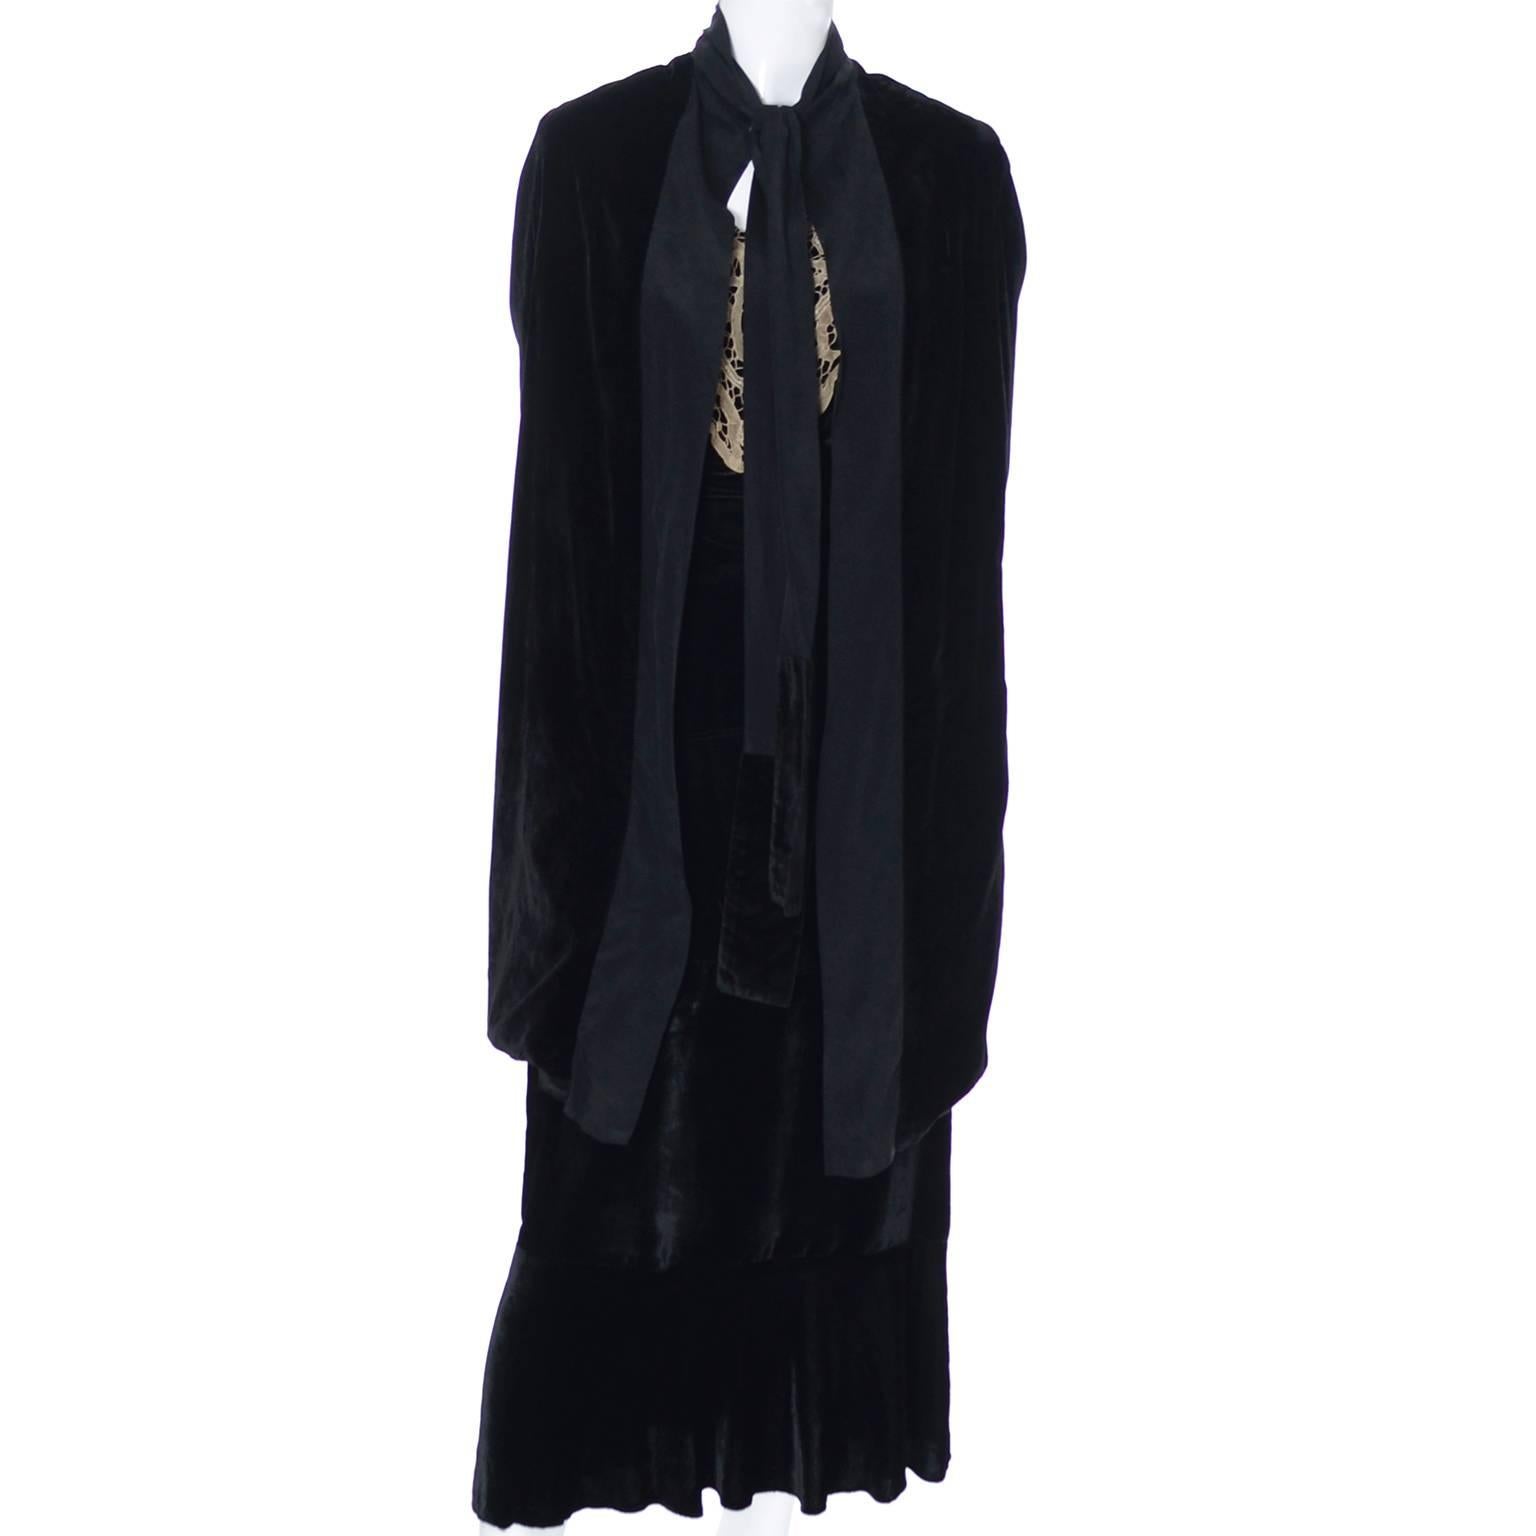 This is a 2 piece outfit that includes a pretty tiered black silk velvet 1920's dress with a lace collar, and a matching black velvet opera coat.  The opera coat is lined and trimmed in a silk crepe and has a sash that can be tied into a bow or a